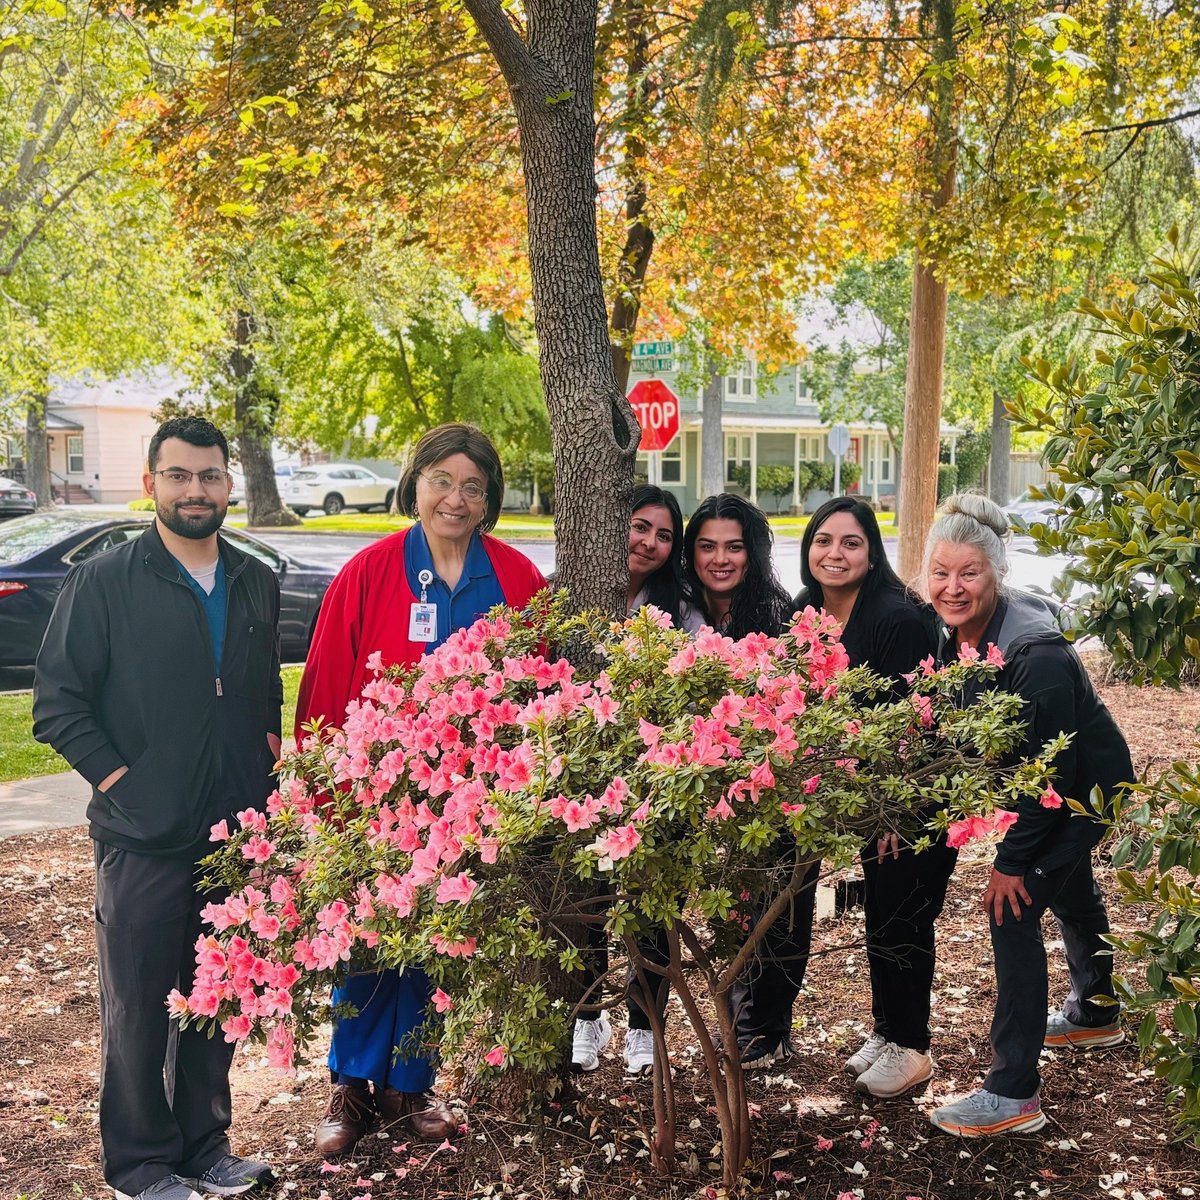 As National Volunteer Week comes to a close, we want to take a moment to express our gratitude for the volunteers at Enloe Health. Your dedication and passion are truly inspiring. Thank you for all that you do!